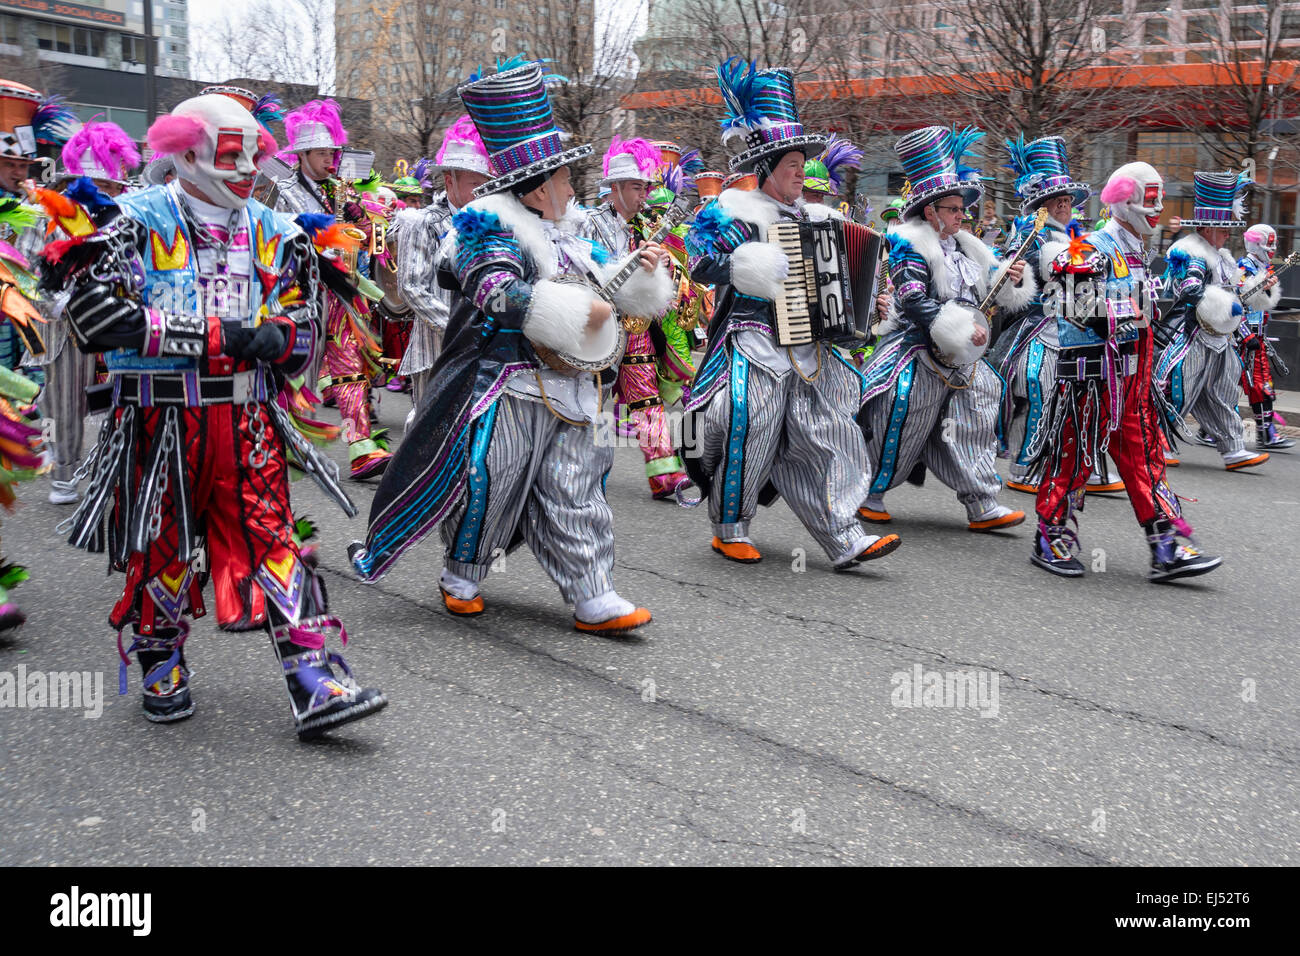 String band musicians playing and marching in colorful carnival costumes,  St. Patrick's Day Parade, Philadelphia, PA, USA Stock Photo